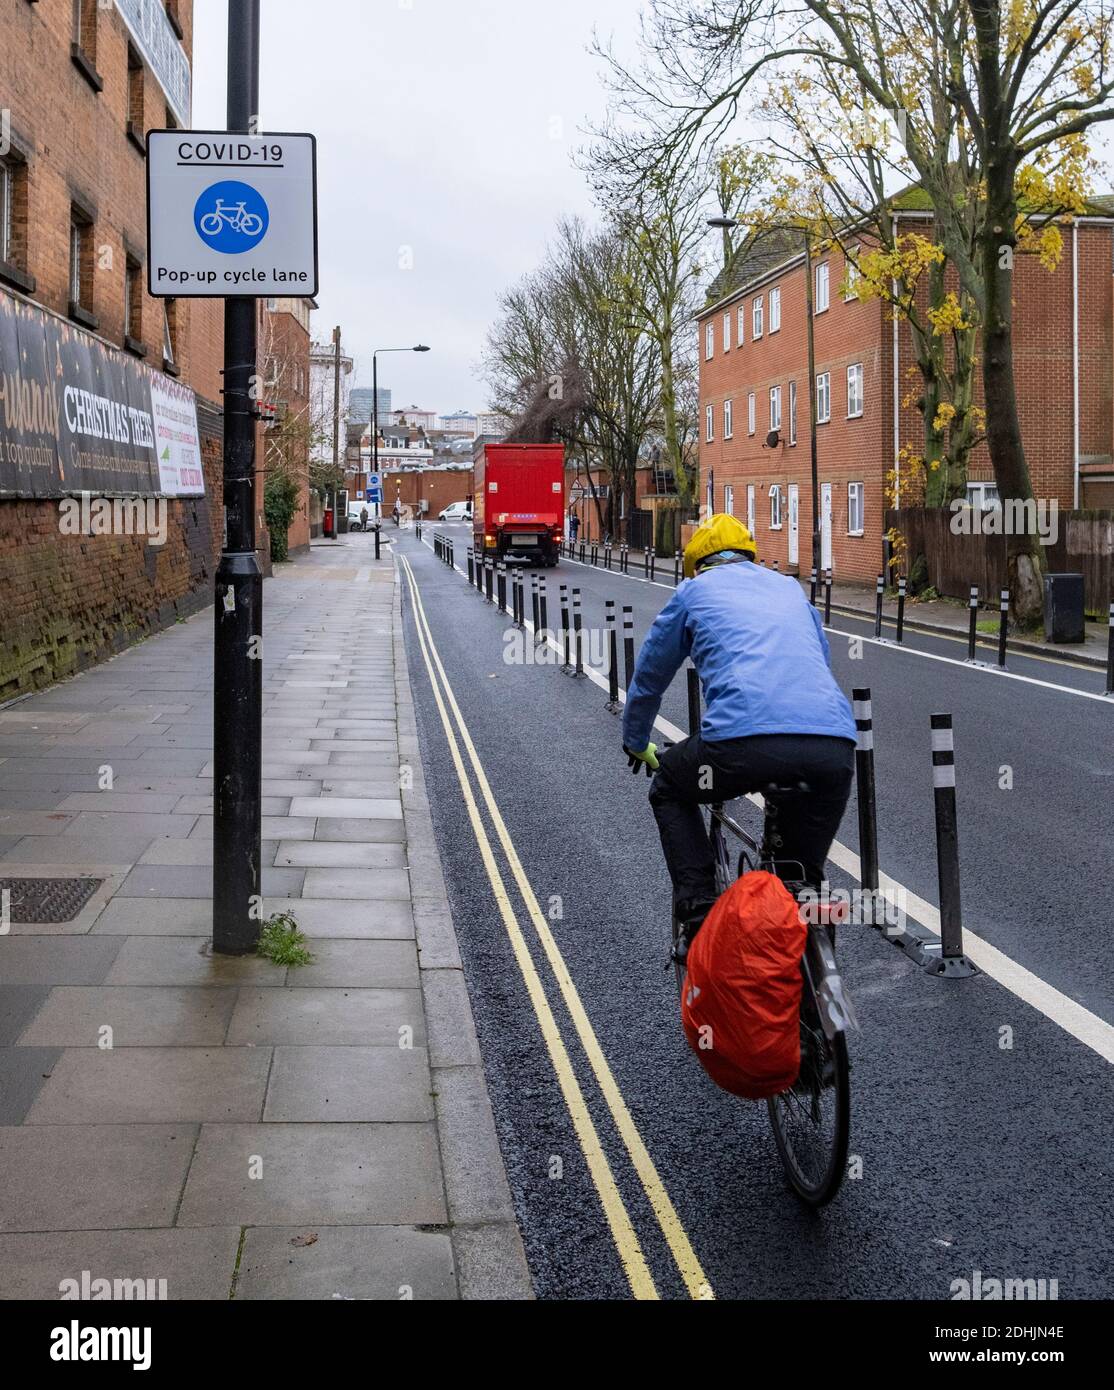 Camden Town, London, December 2020: a Covid-19 pop-up cycle lane created to increase capacity for alternative transport during the pandemic Stock Photo